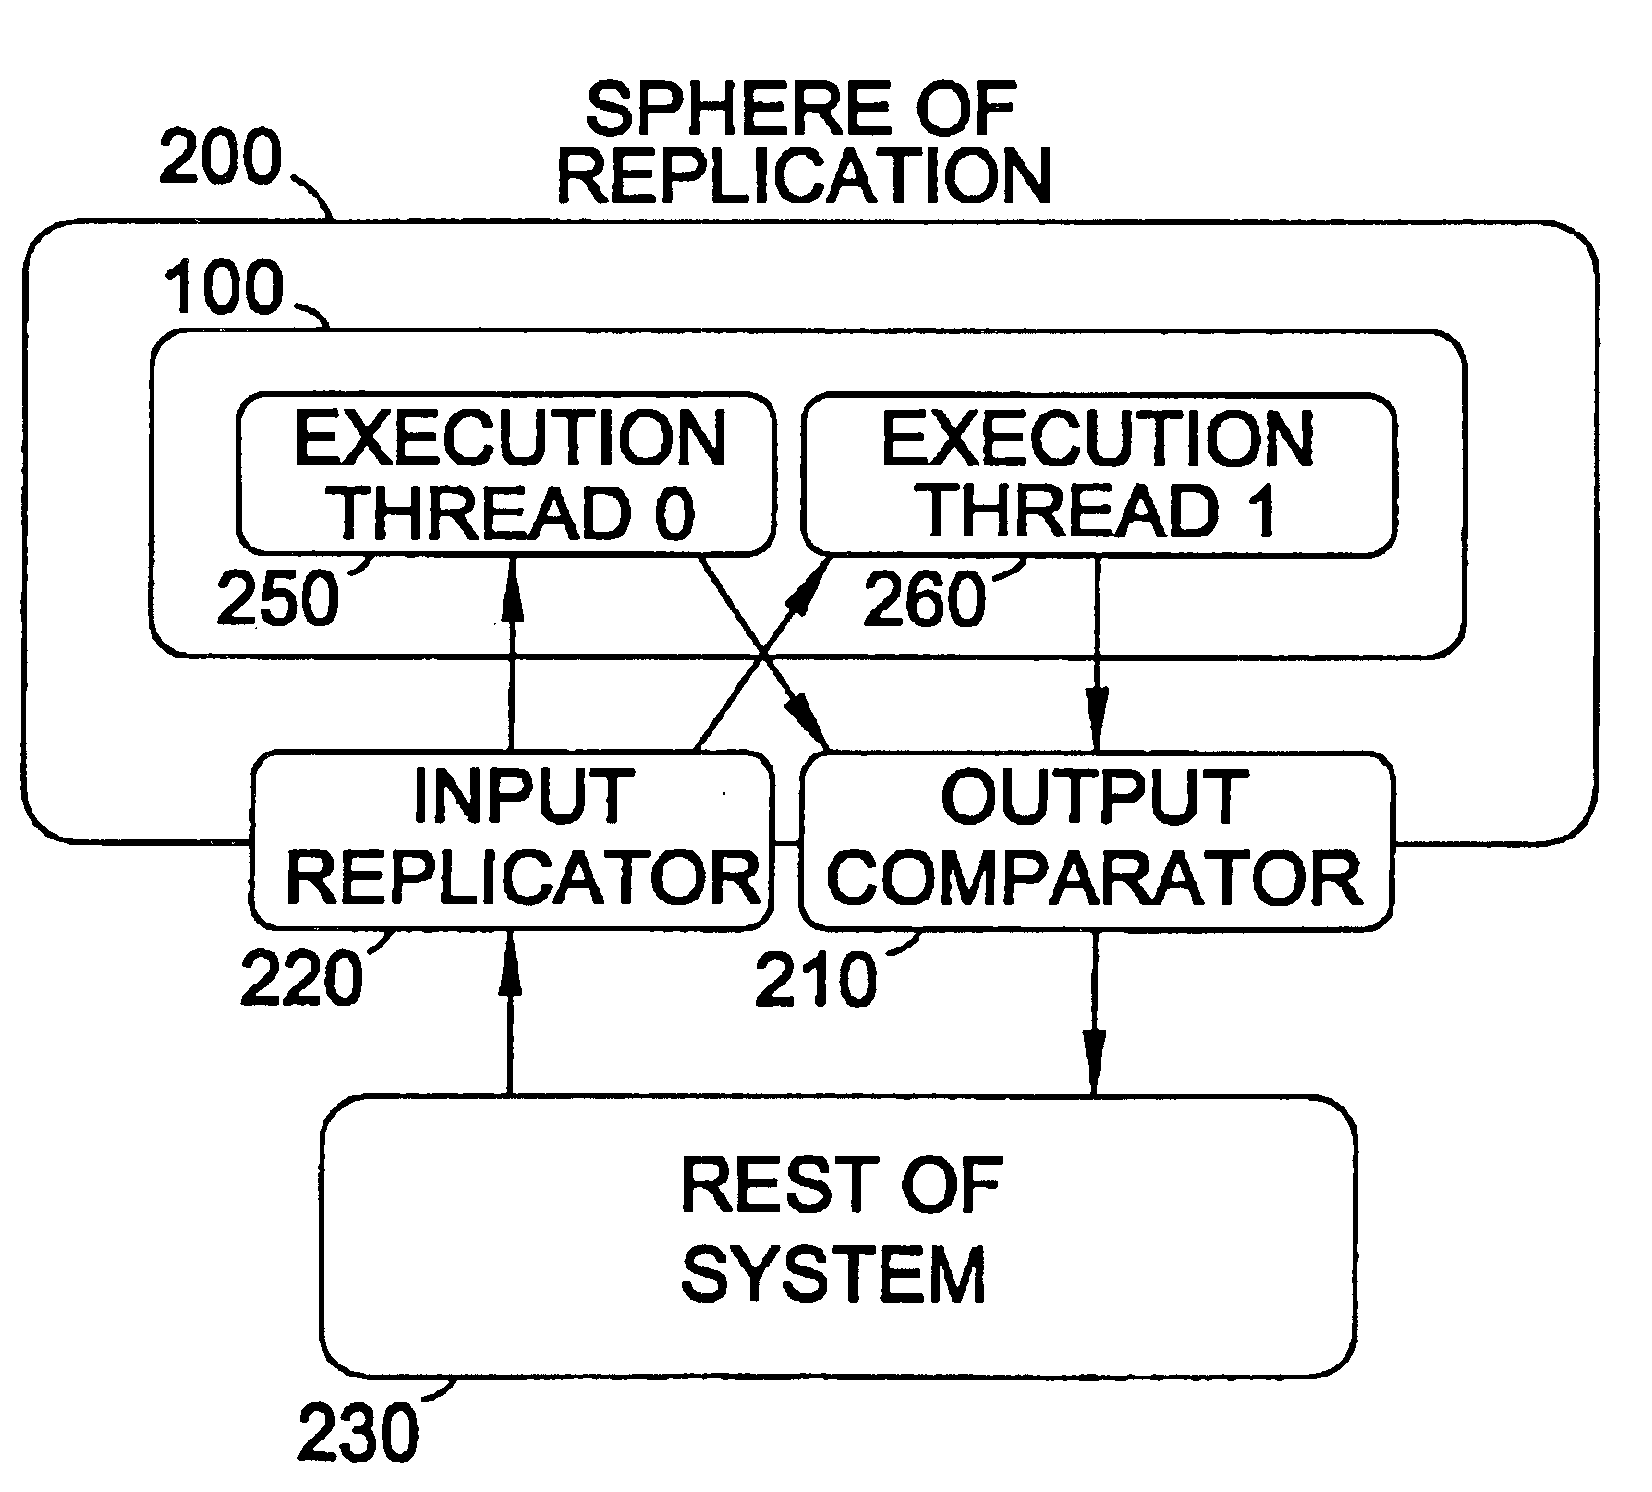 Cycle count replication in a simultaneous and redundantly threaded processor